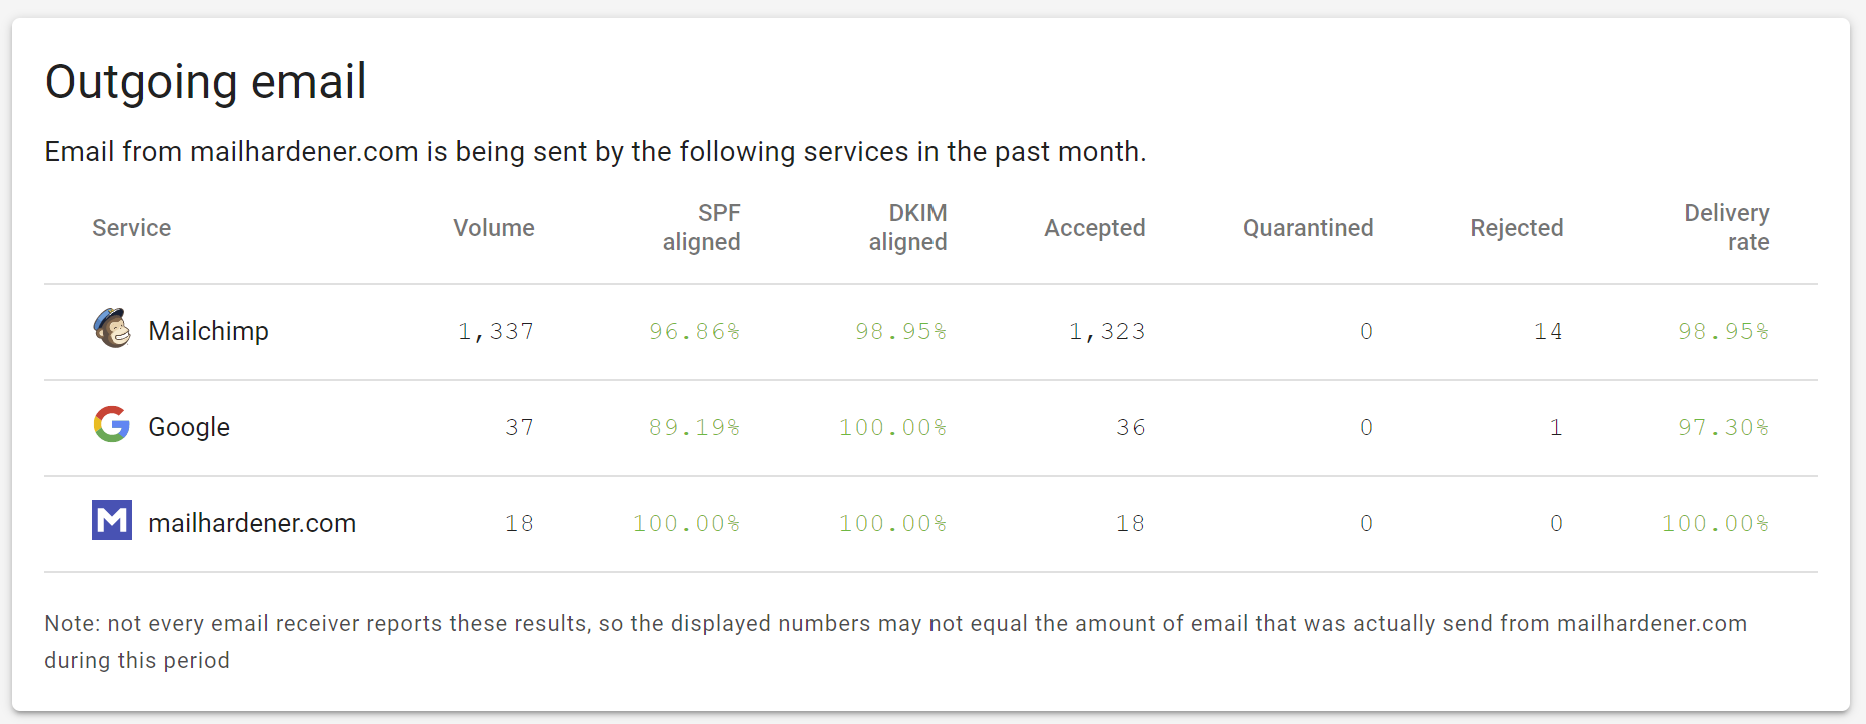 The outgoing email overview shows you the delivery statistics per sender